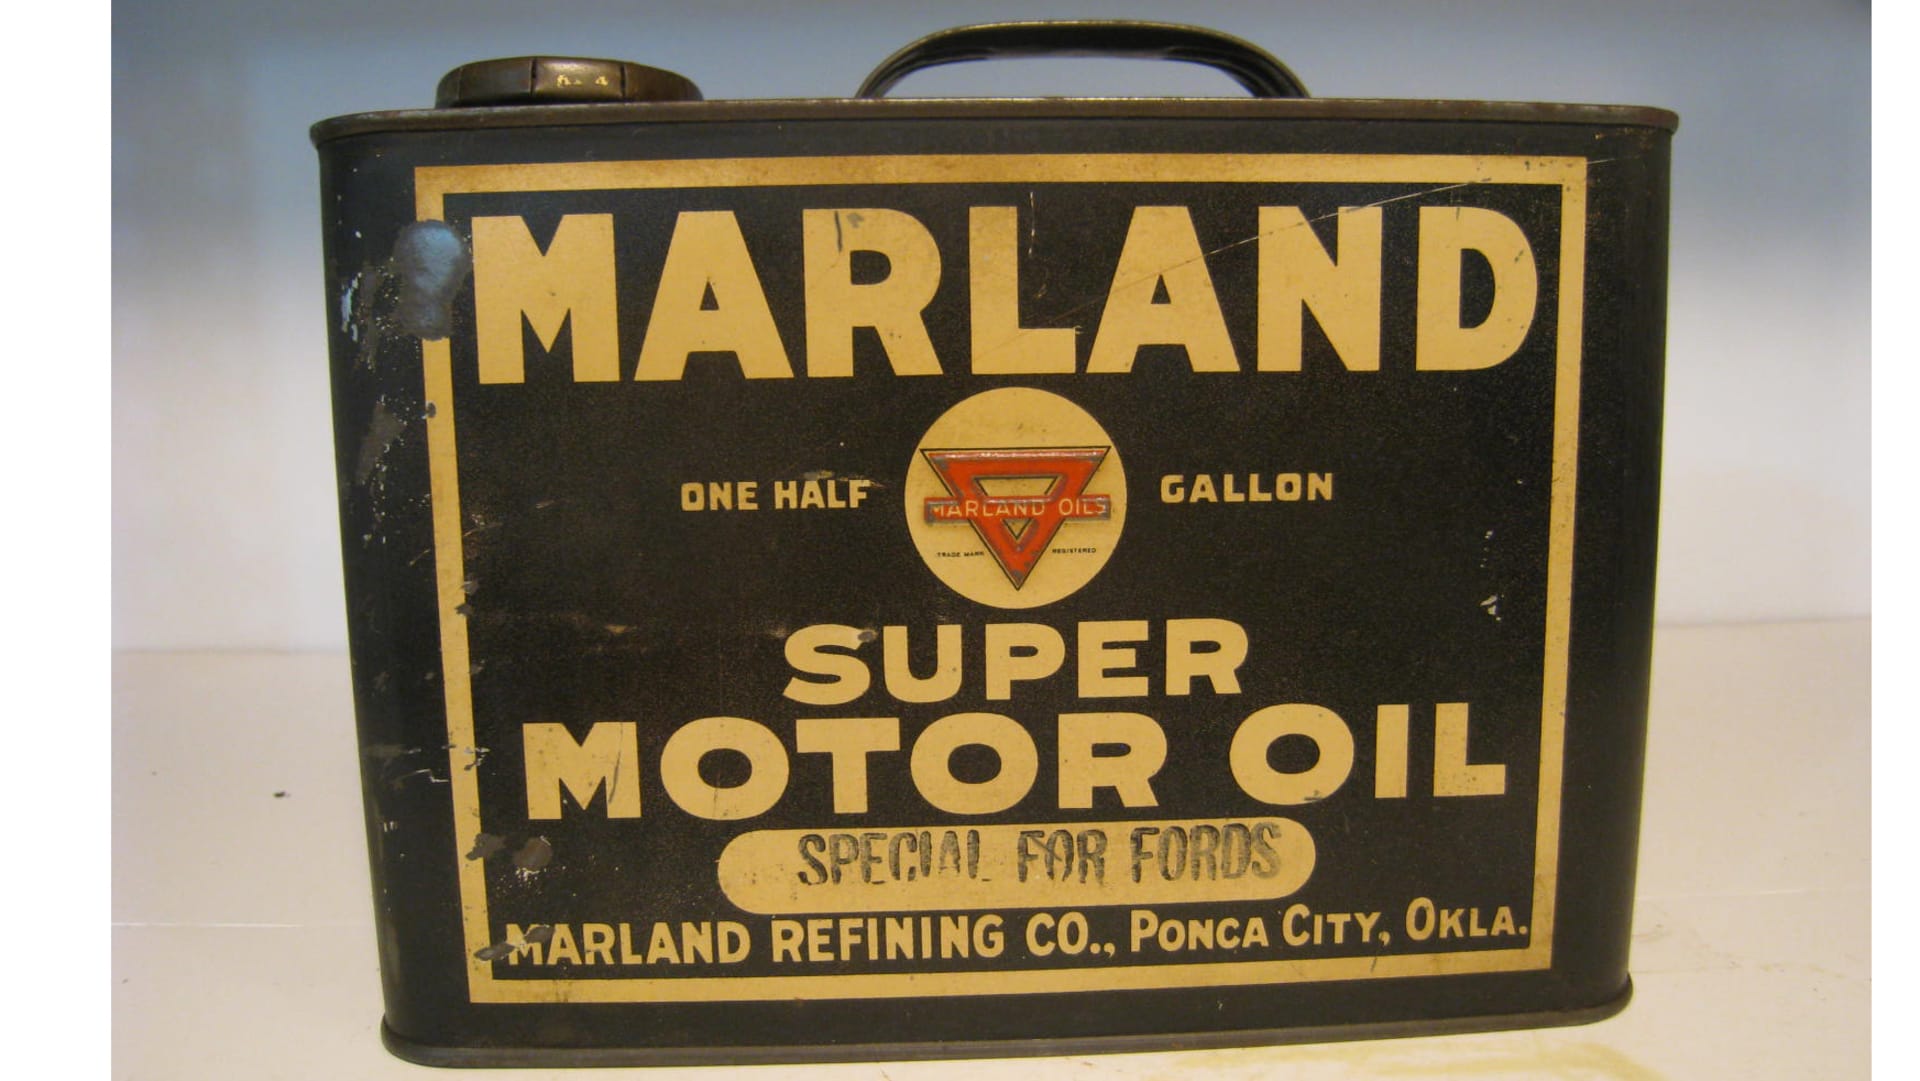 Marland Super Motor Oil Half Gallon Oil Can at Kissimmee 2016 as Z527 ...